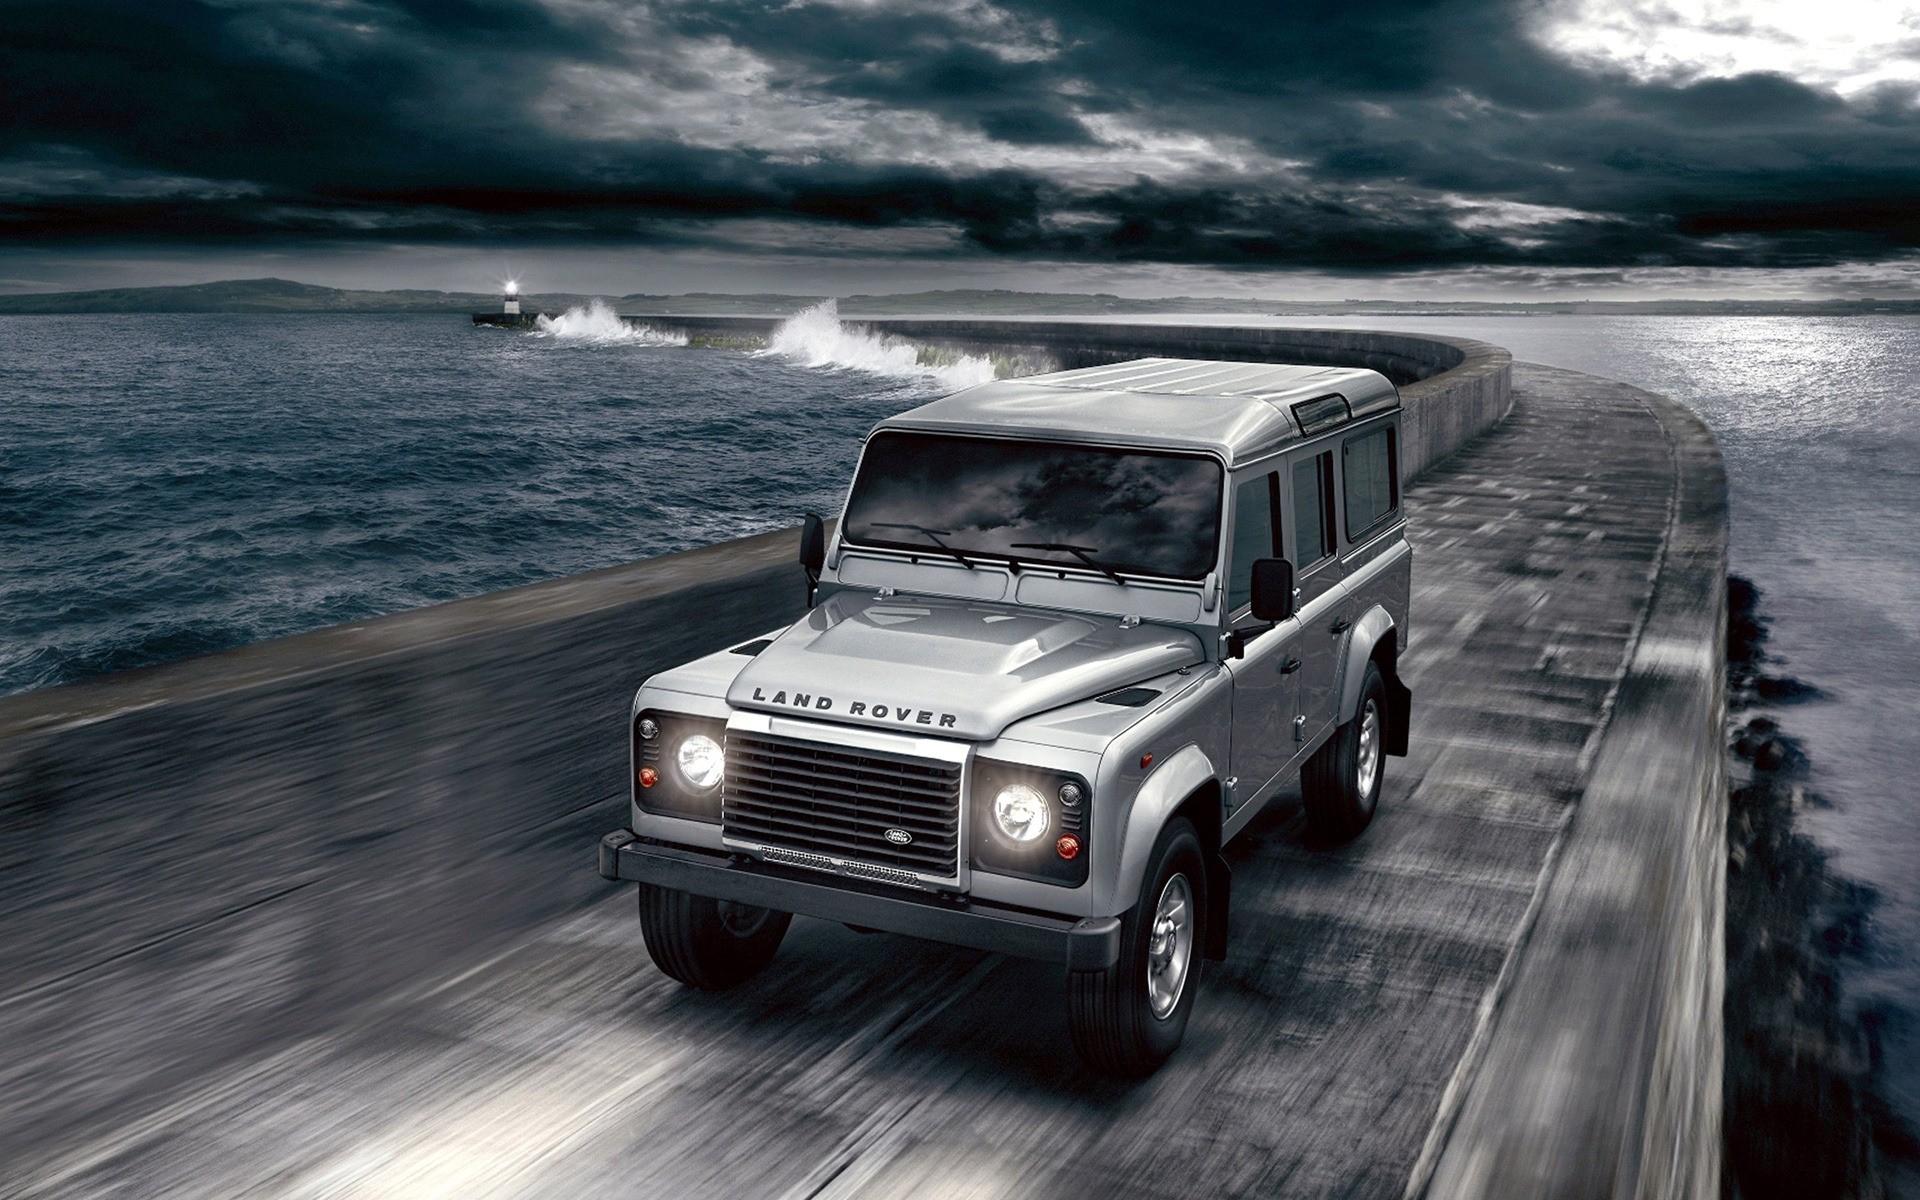 2012 Land Rover Defender Iphone Wallpapers For Free